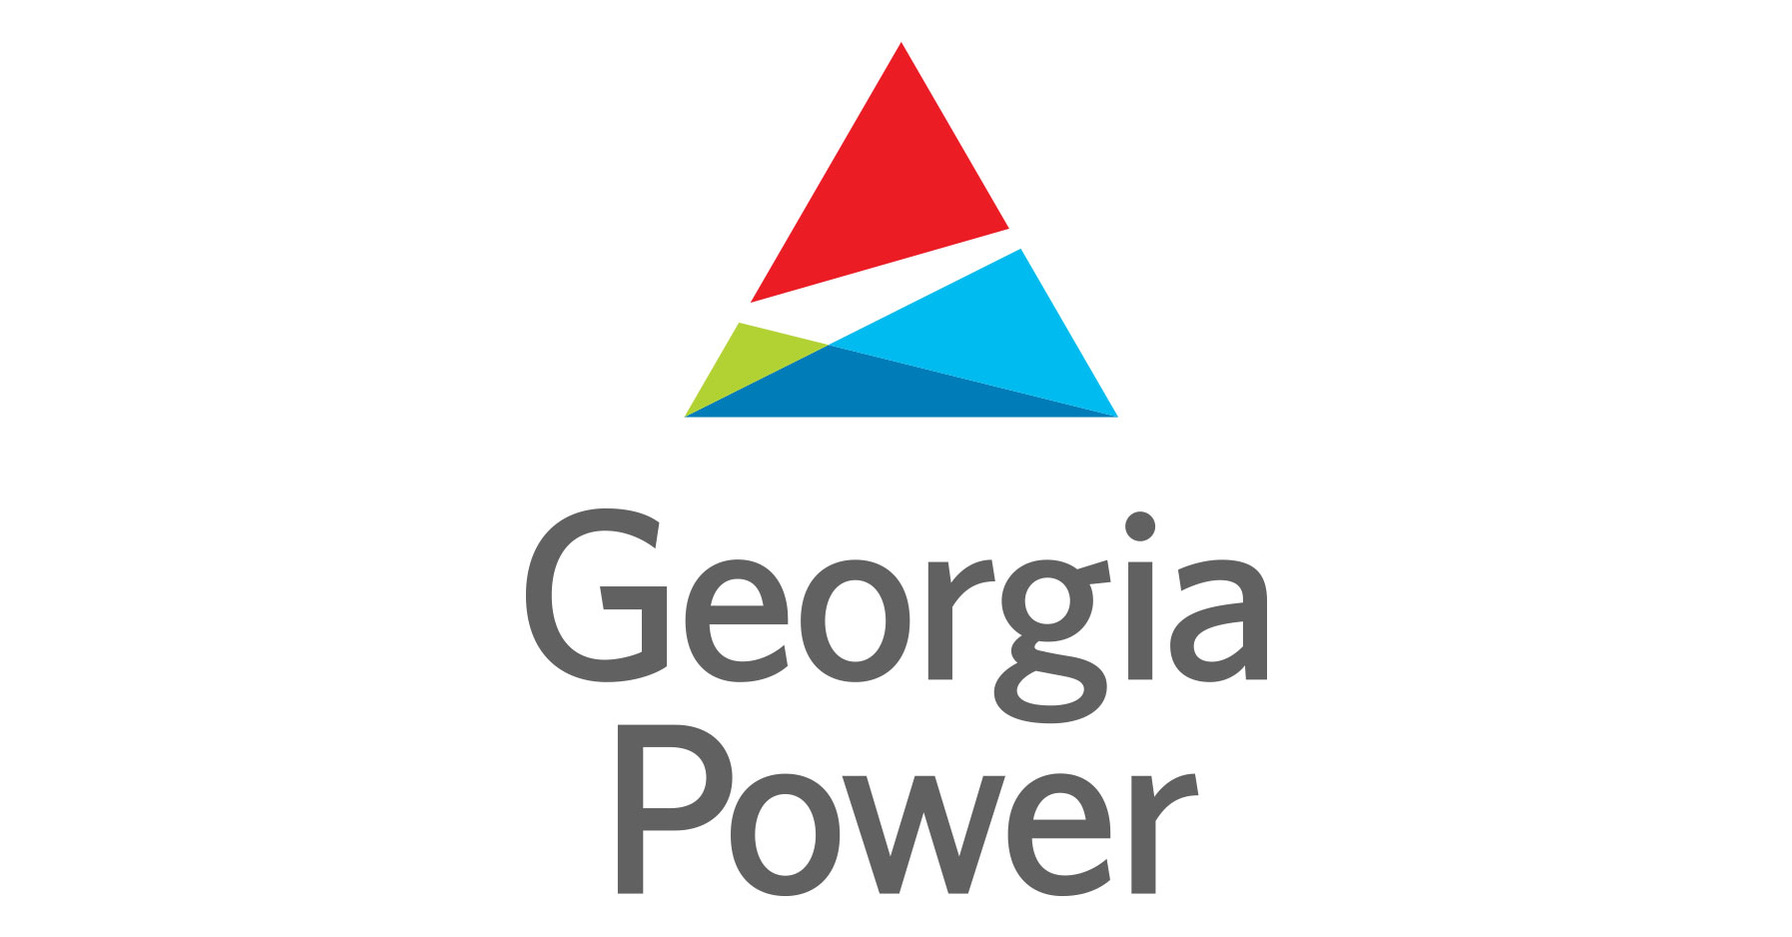 georgia-power-named-top-utility-for-economic-development-by-site